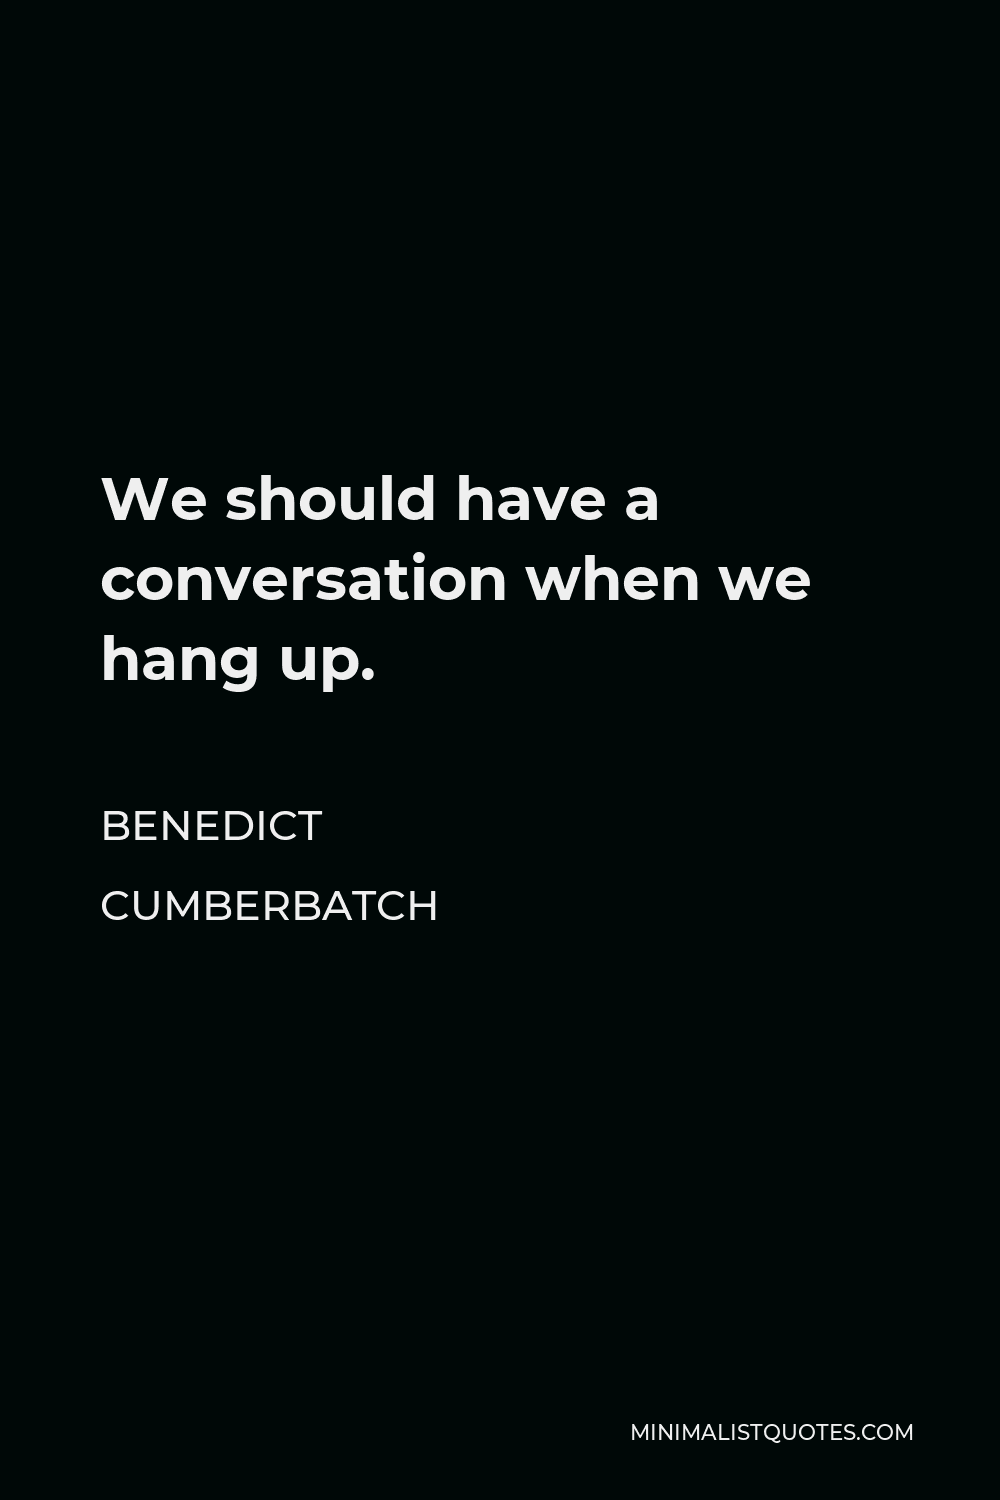 Benedict Cumberbatch Quote - We should have a conversation when we hang up.